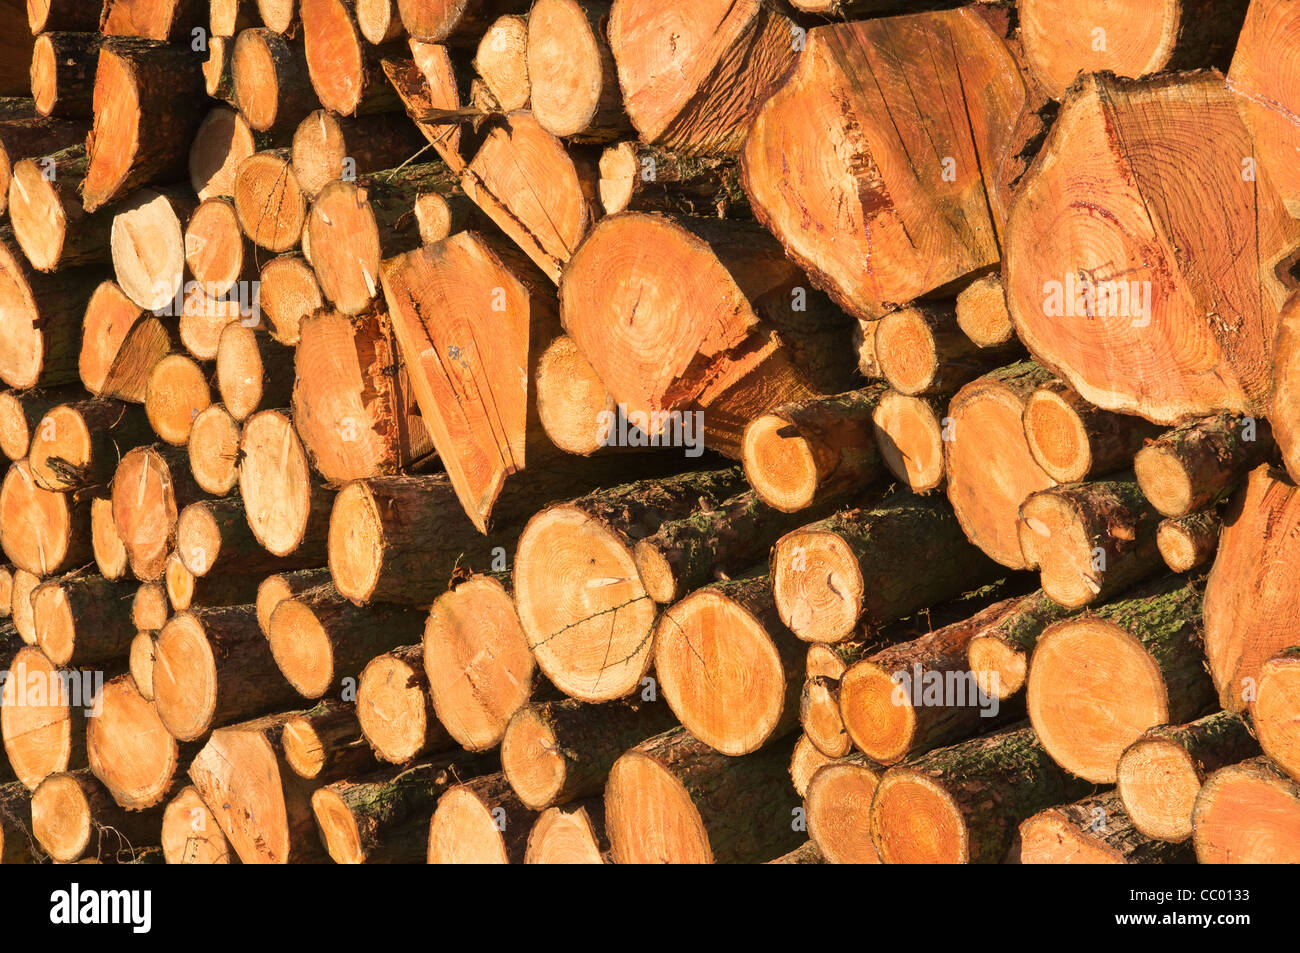 Forestry timber. Stock Photo